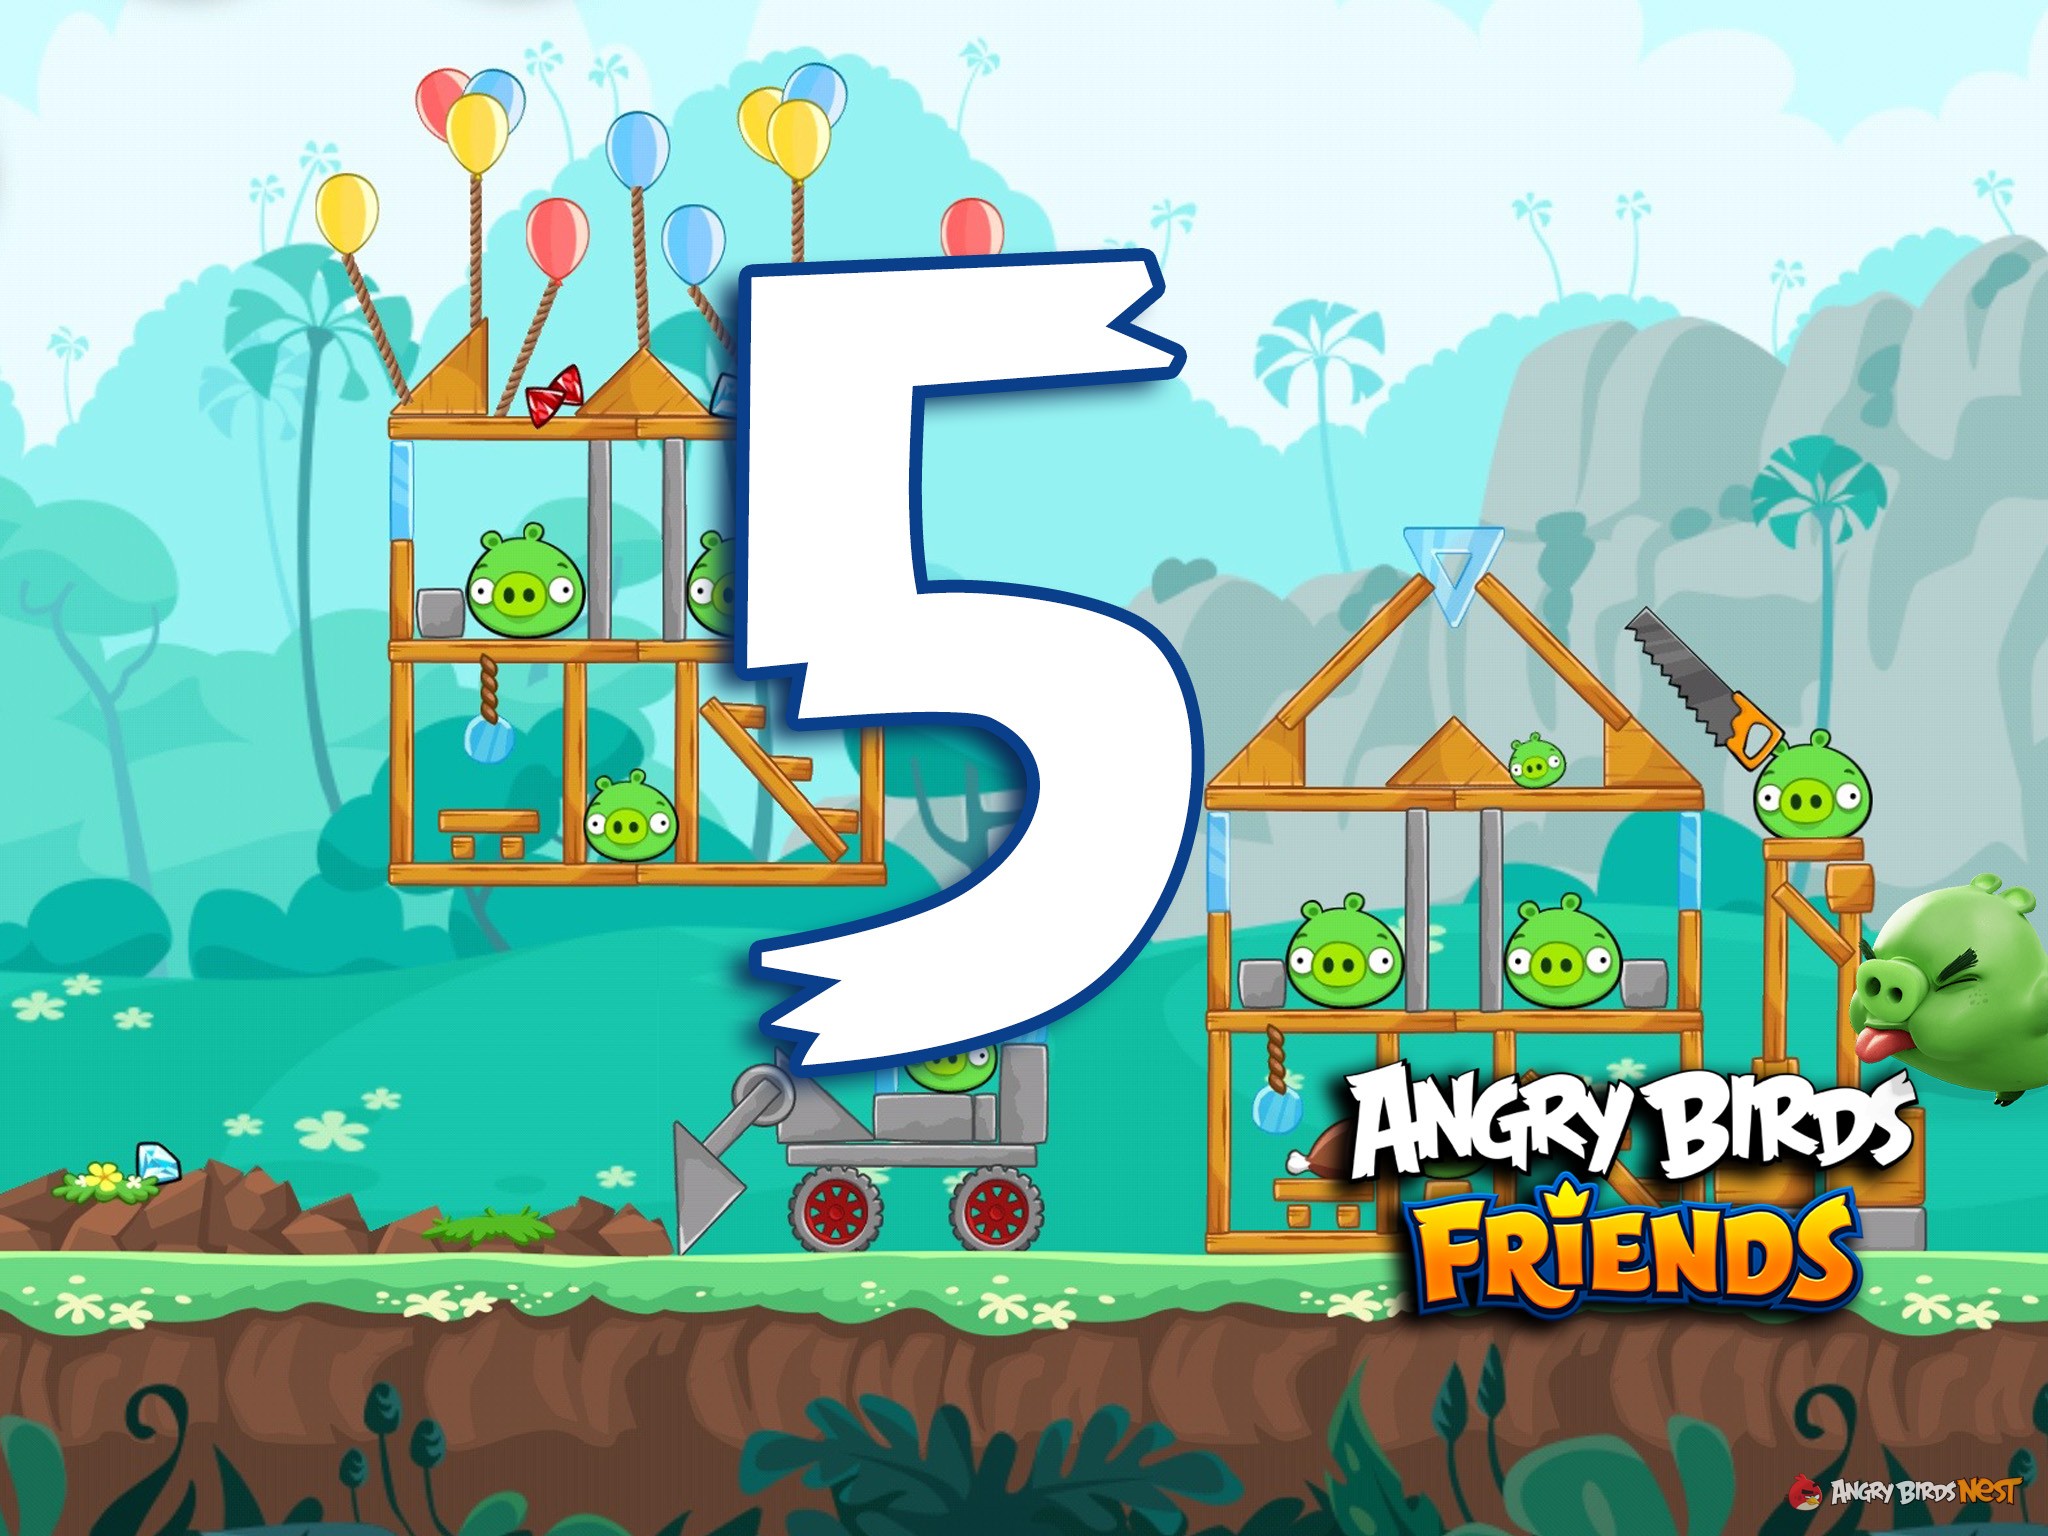 how to beat level 4 on angry birds friends halloween mania week level 4 2017